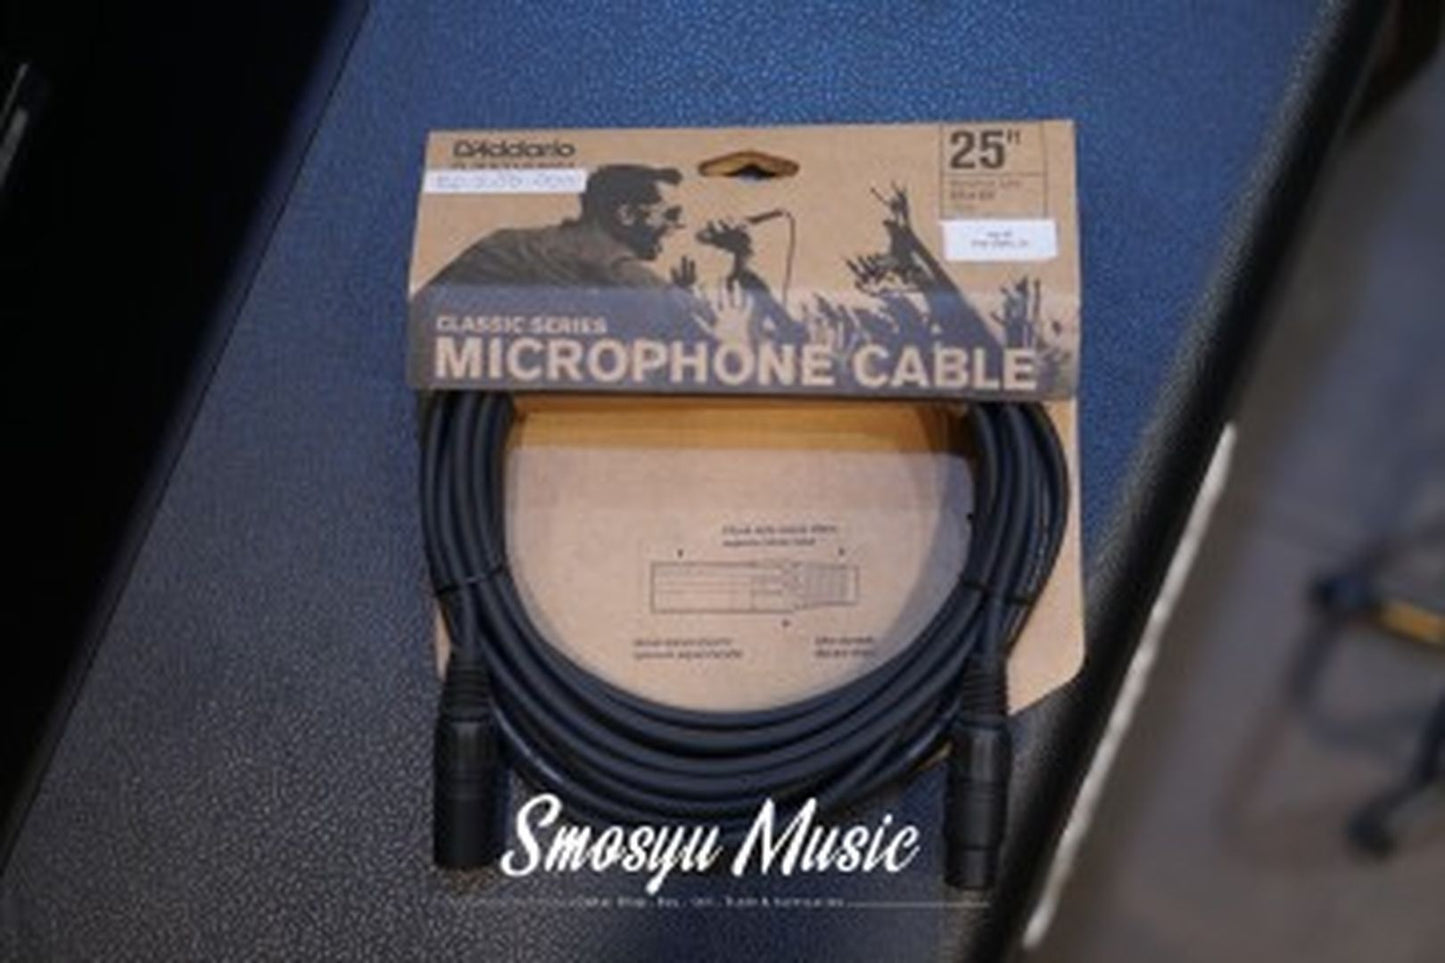 D'addario Microphone Cable Classic Series 25